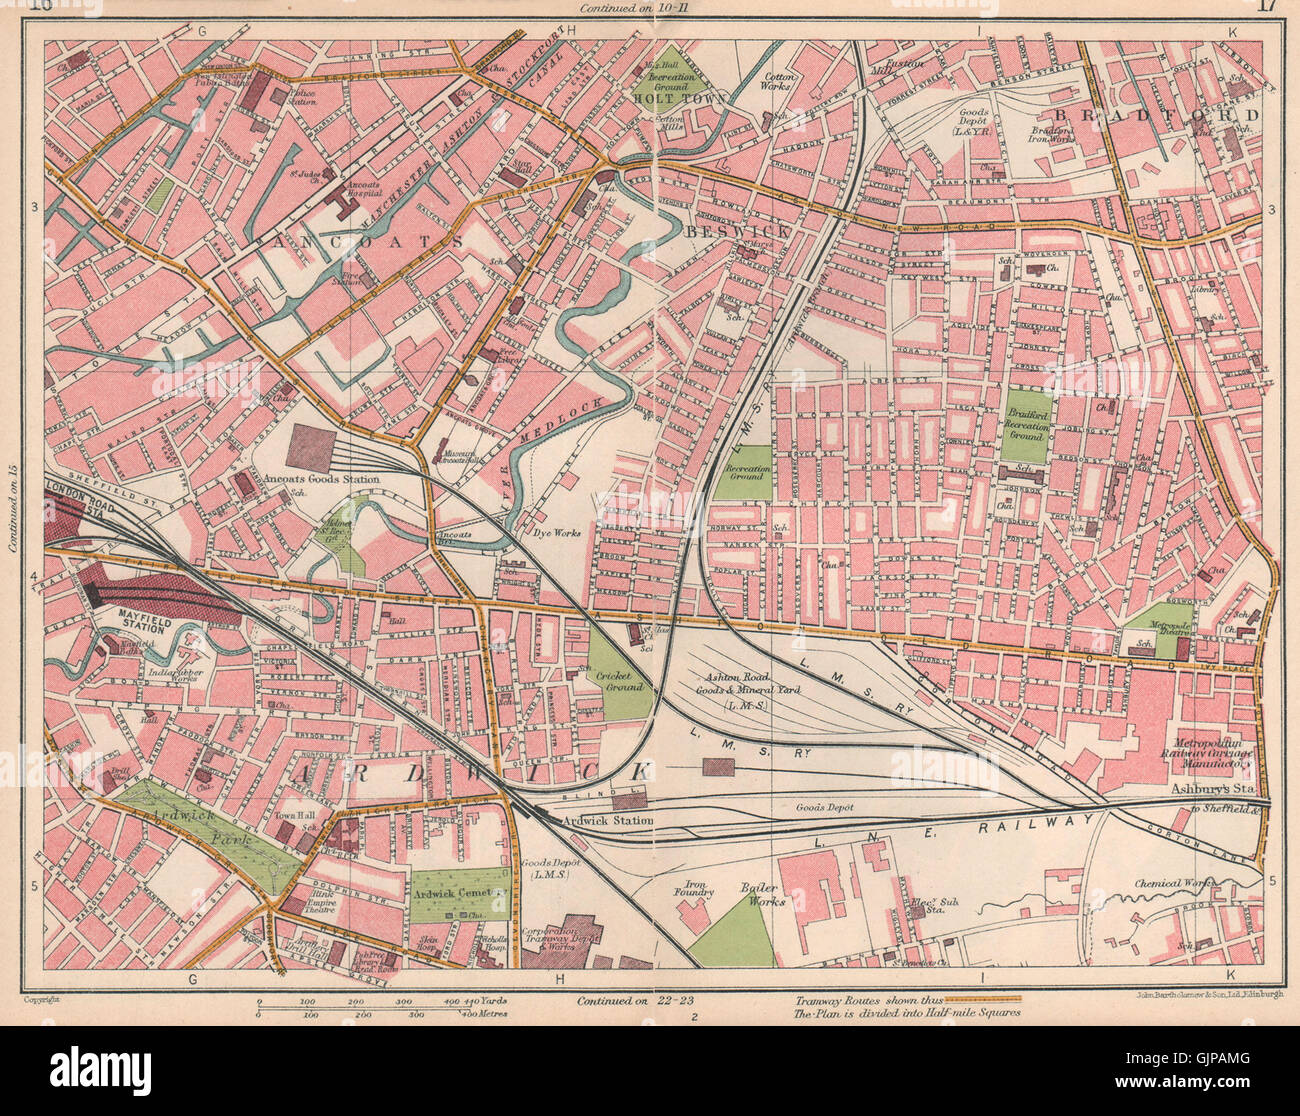 MANCHESTER EAST. Ancoats nuovo Islington Ardwick Beswick, 1927 Vintage map Foto Stock